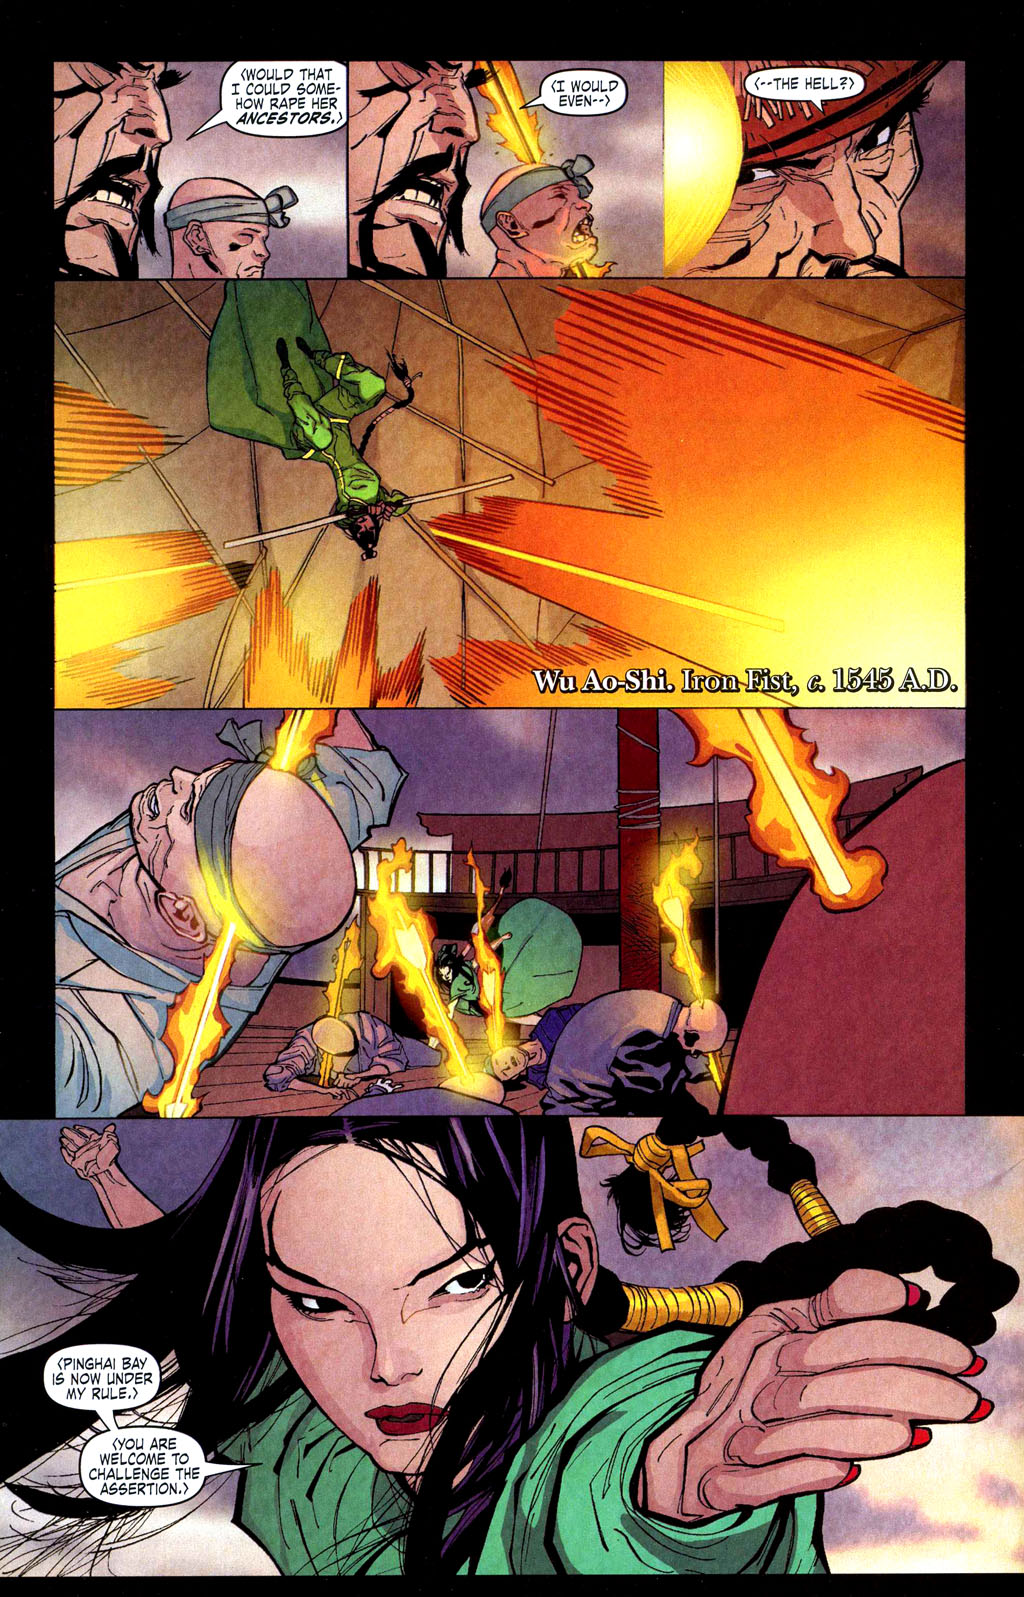 Wu Ao-Shi stands in defense of Pinghai Bay in Immortal Iron Fist Vol. 1 #2 "The Last Iron Fist Story, Part 2" (2006), Marvel Comics. Words by Ed Brubaker and Matt Fraction, art by David Aja, Matt Hollingsworth, and Dave Lanphear.